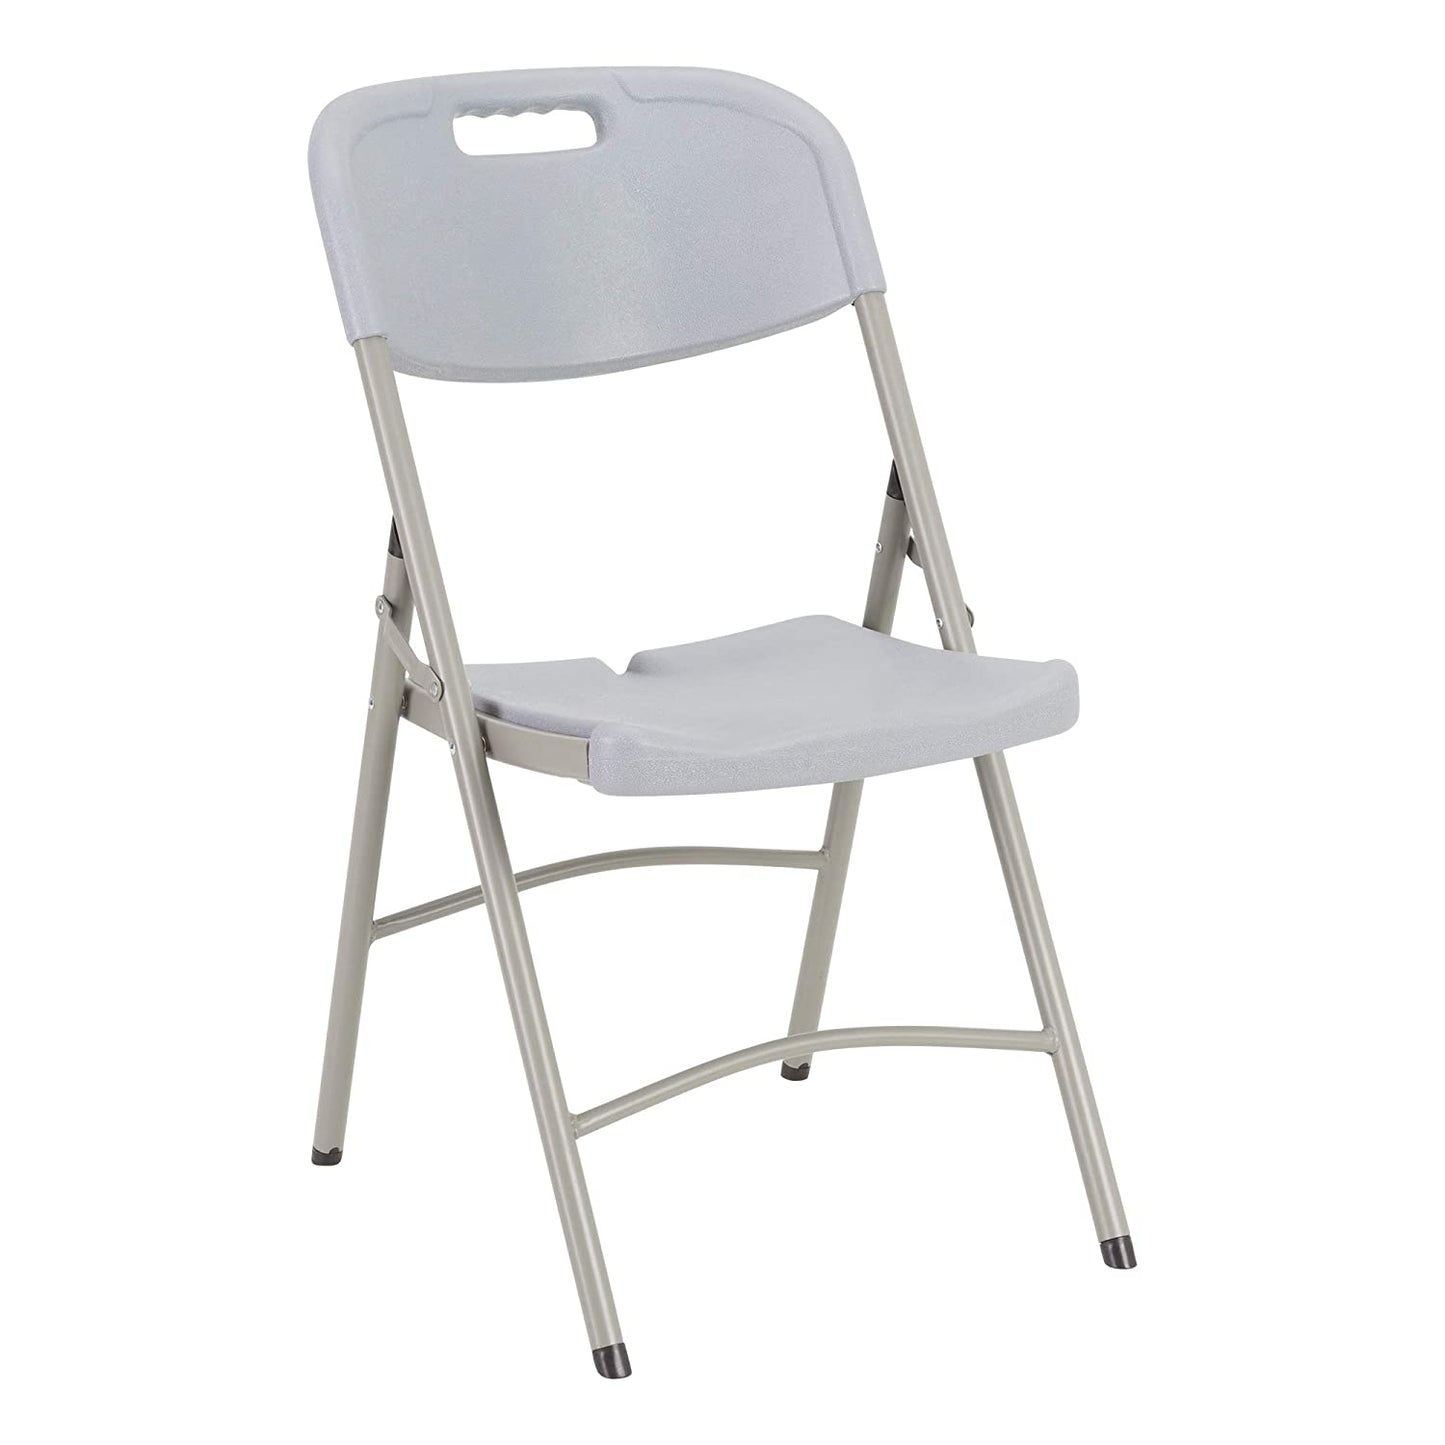 Blow-Molded Plastic Folding Chairs for Indoor/Outdoor Events, Commercial Event Chairs with 400-Lb. Weight Capacity, Set of 4, Gray